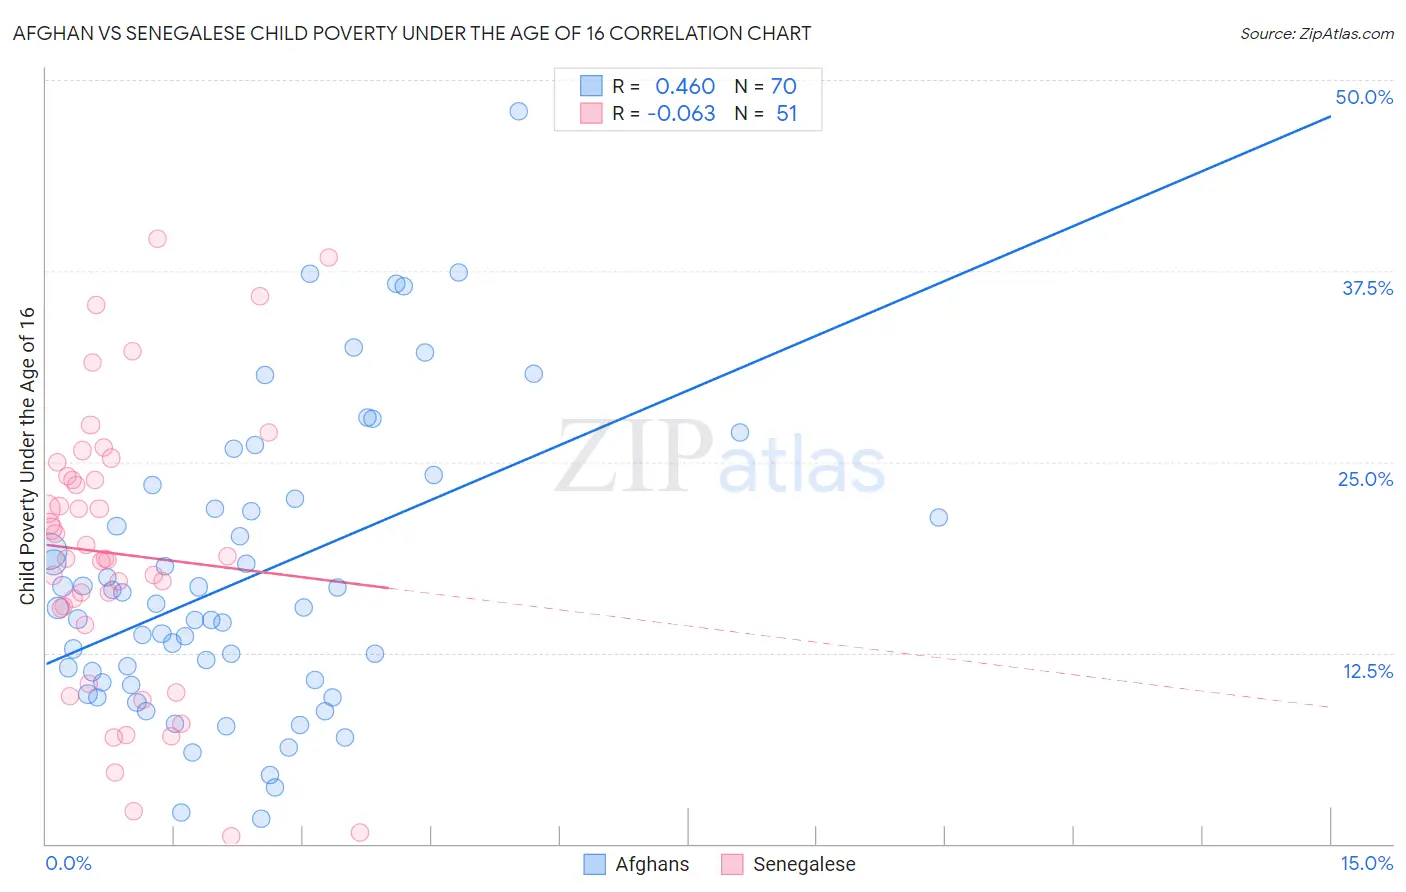 Afghan vs Senegalese Child Poverty Under the Age of 16